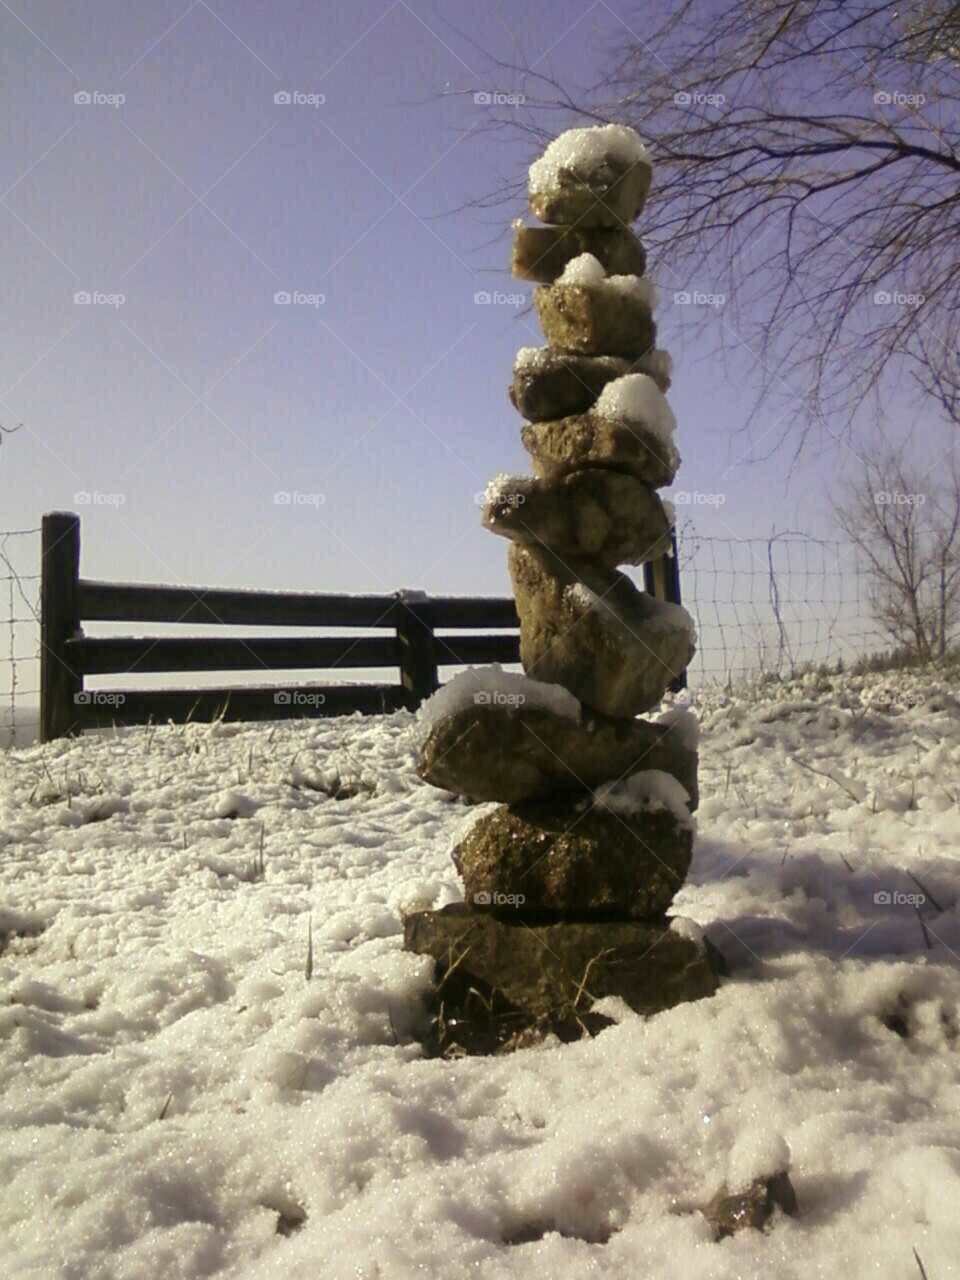 rock cairn on hillside. I added one each day on my walks until it fell over